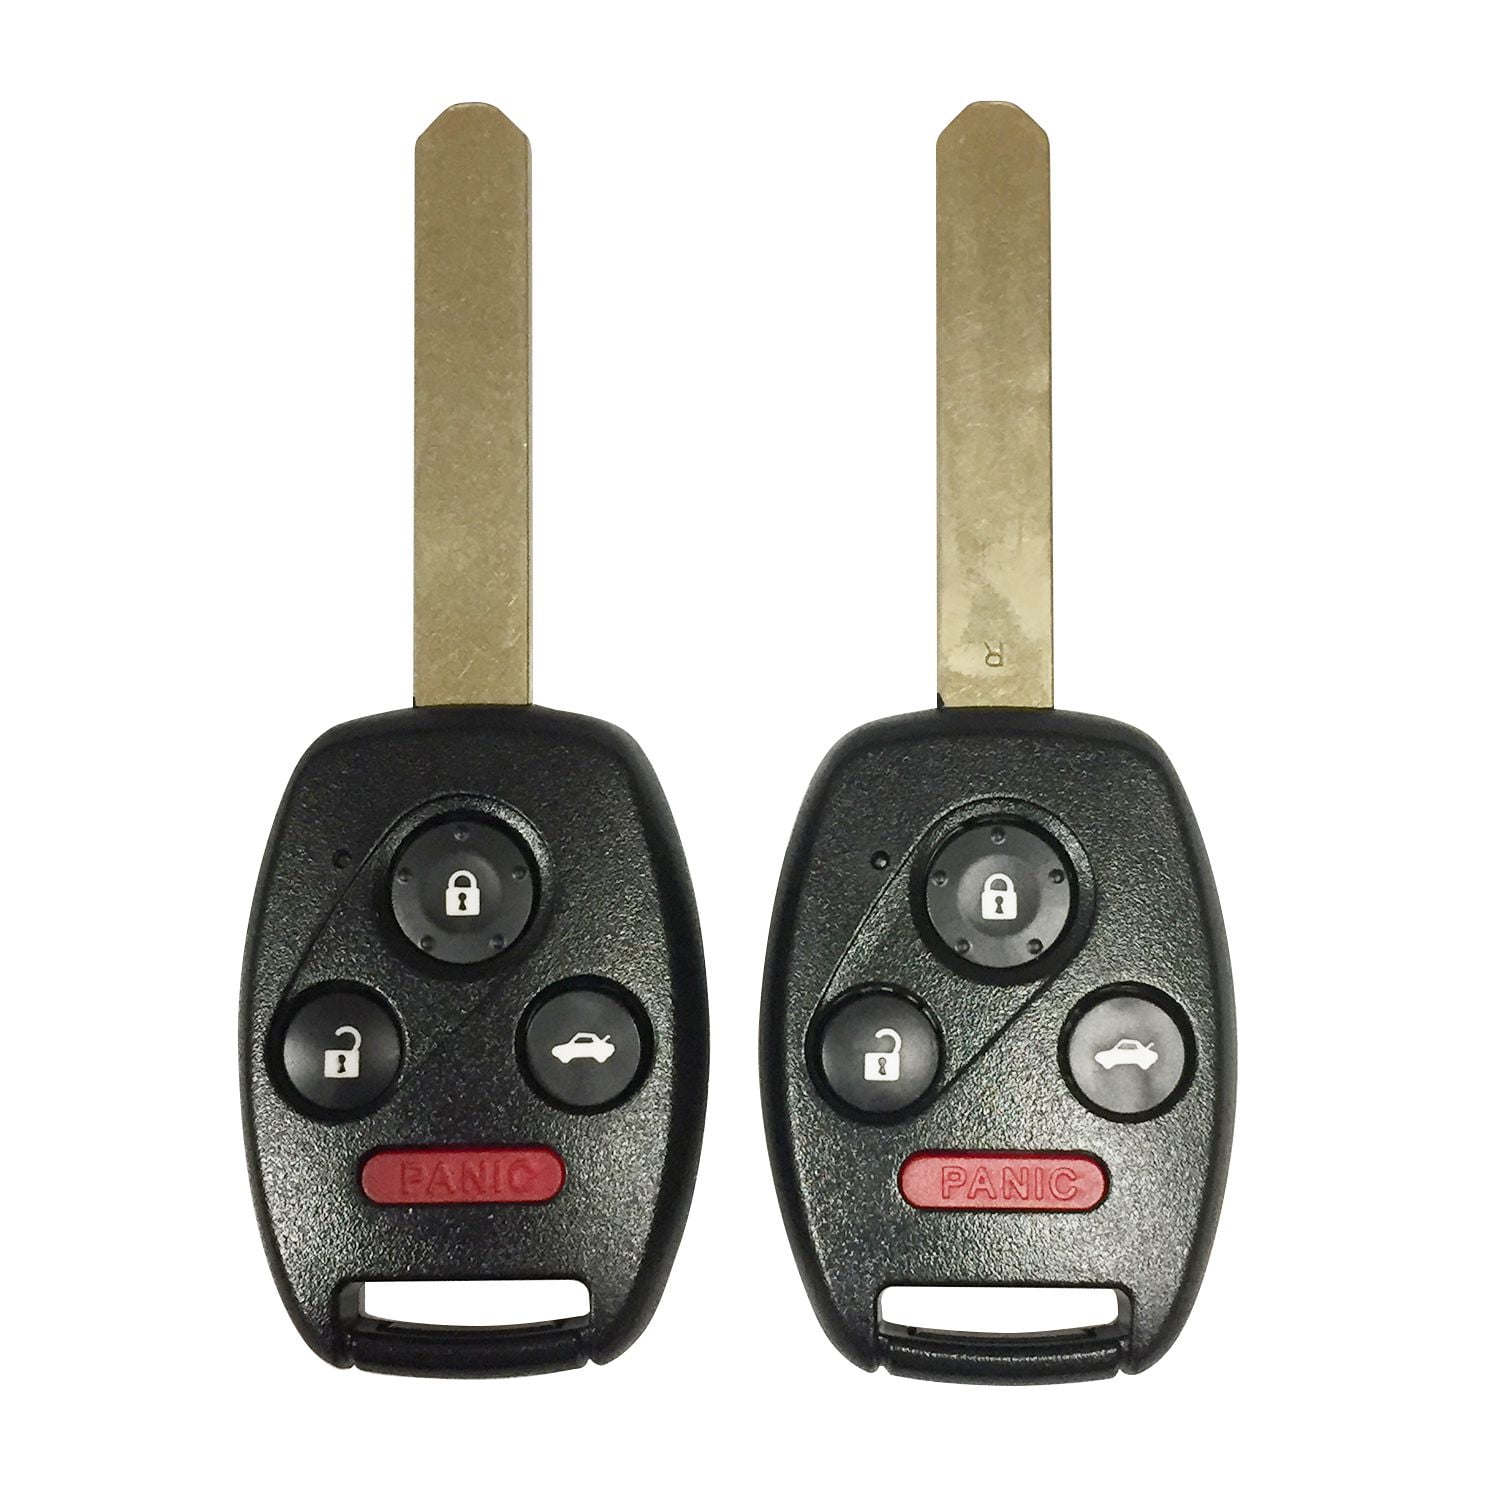 NEW Keyless Entry Key Fob Remote For a 2013 Honda Accord 4 Buttons 